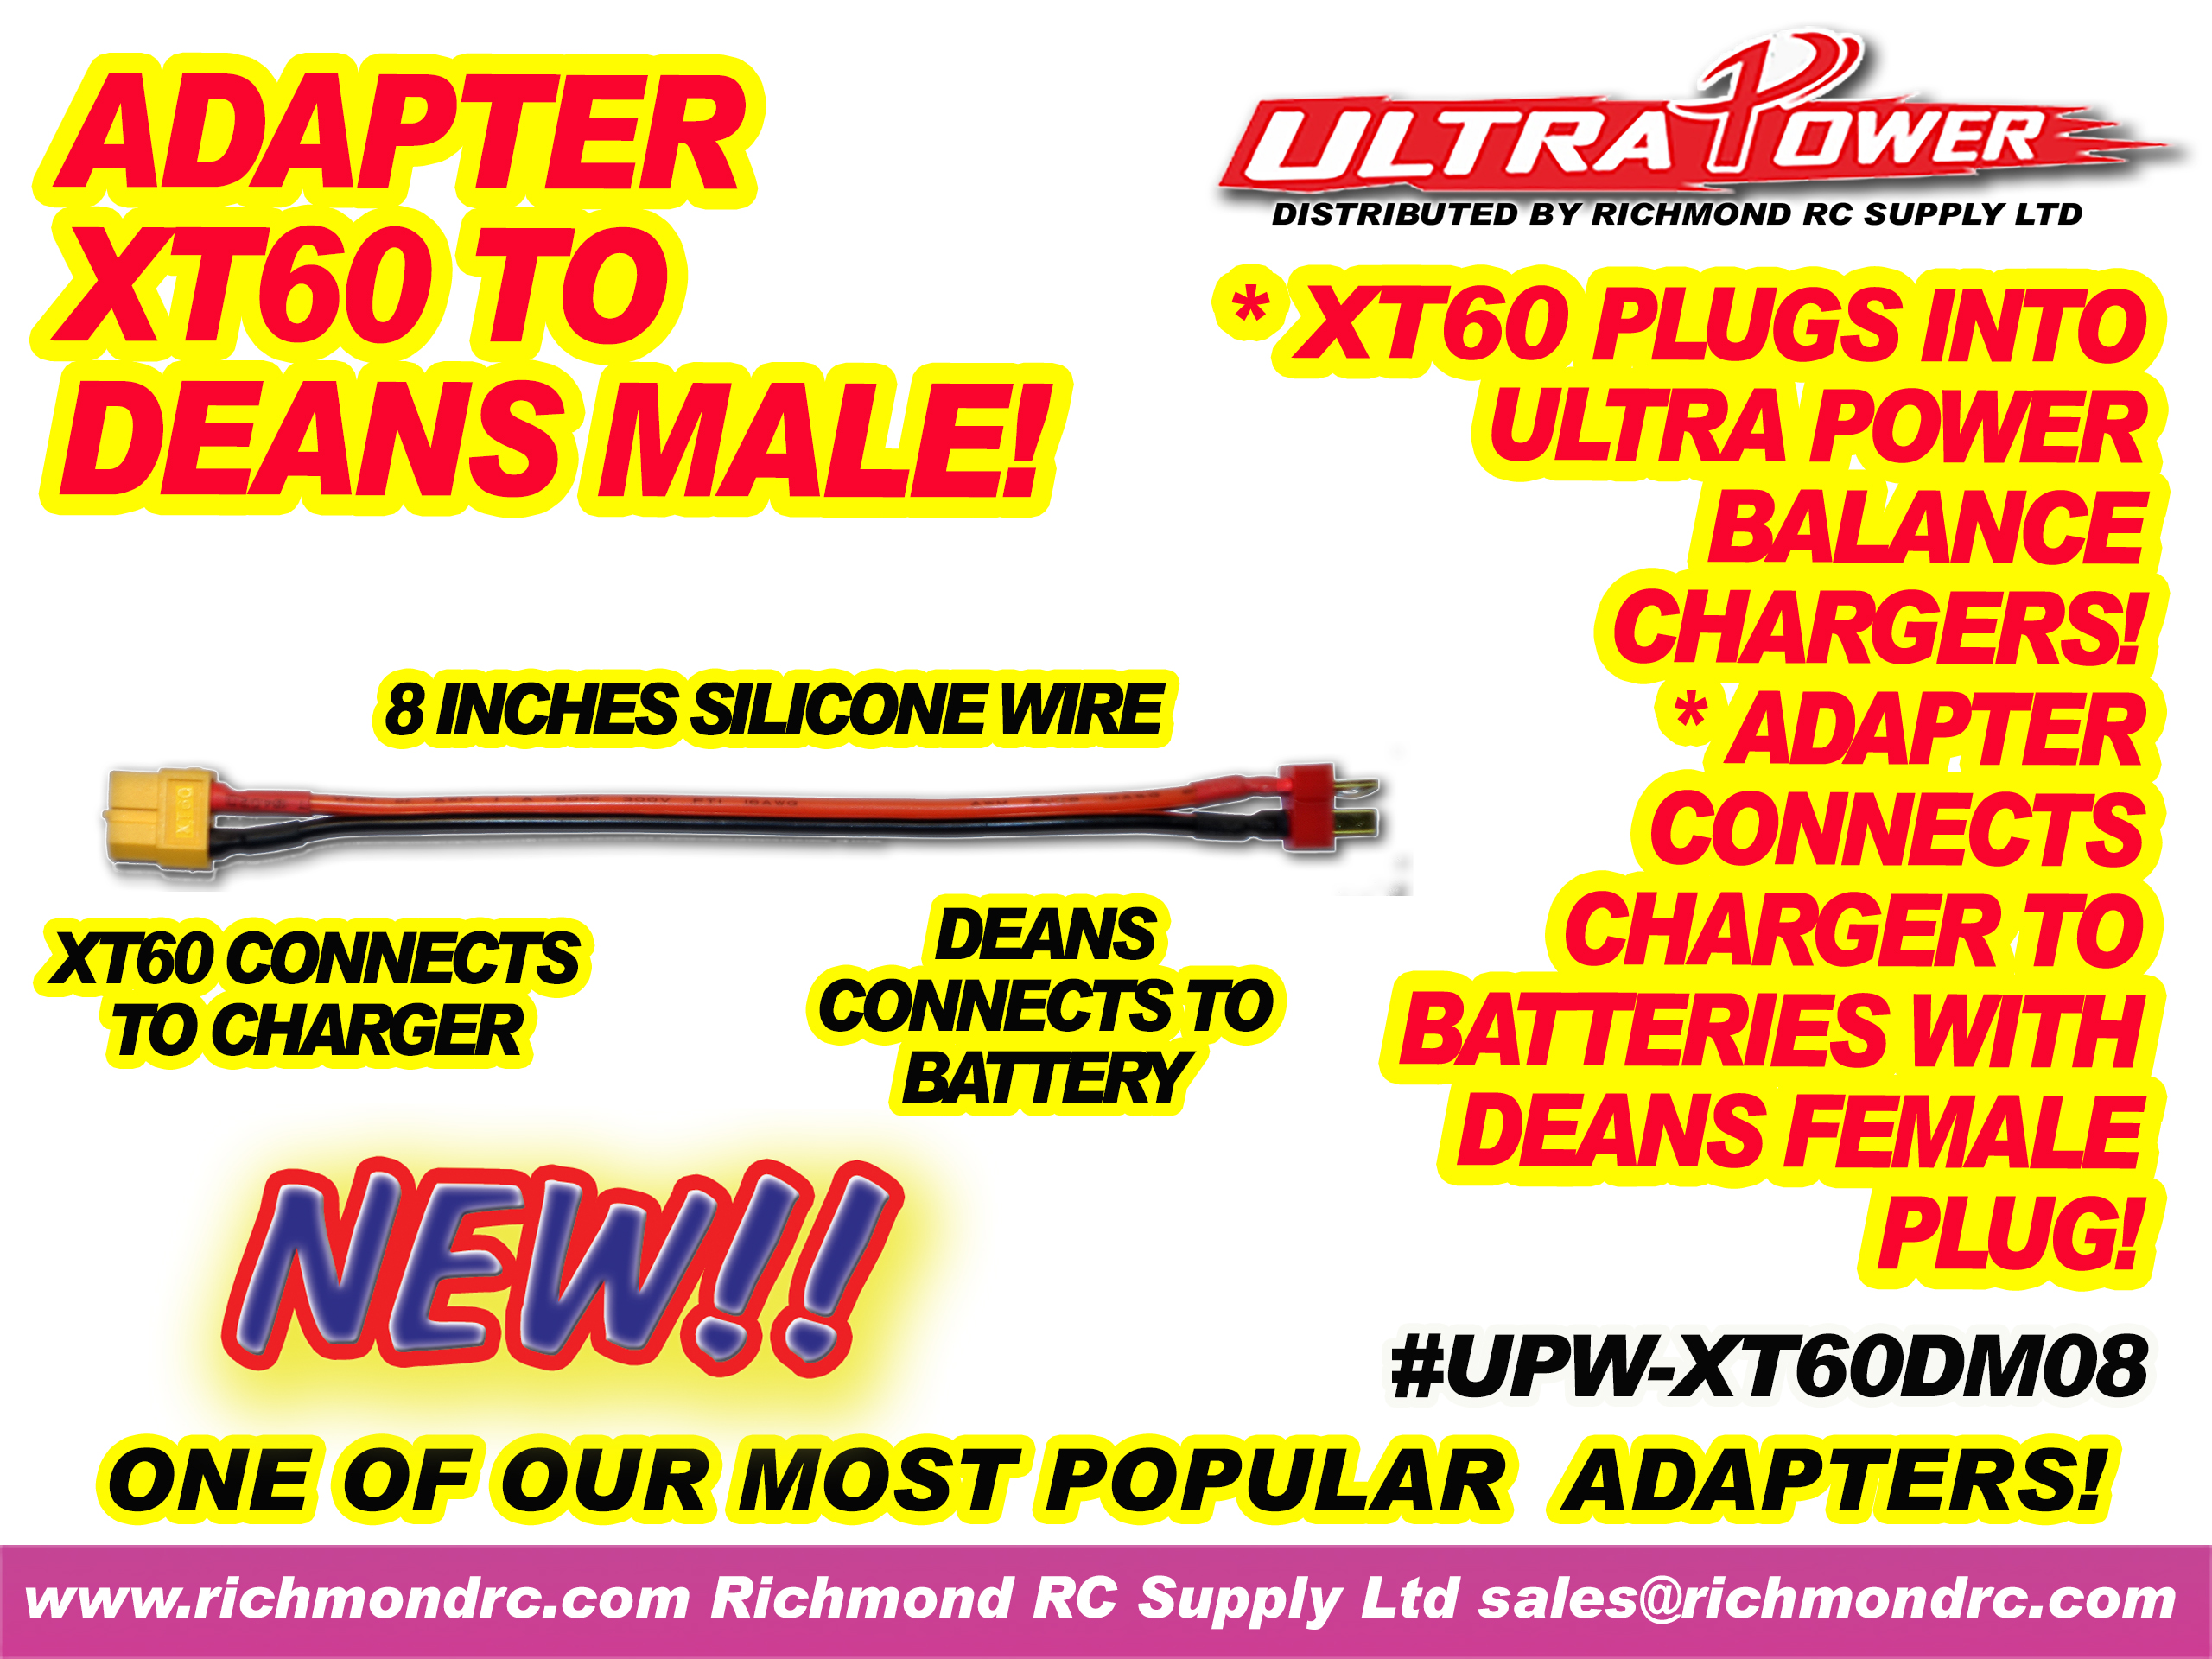 Ultra Power Adapter XT60 to Deans Male